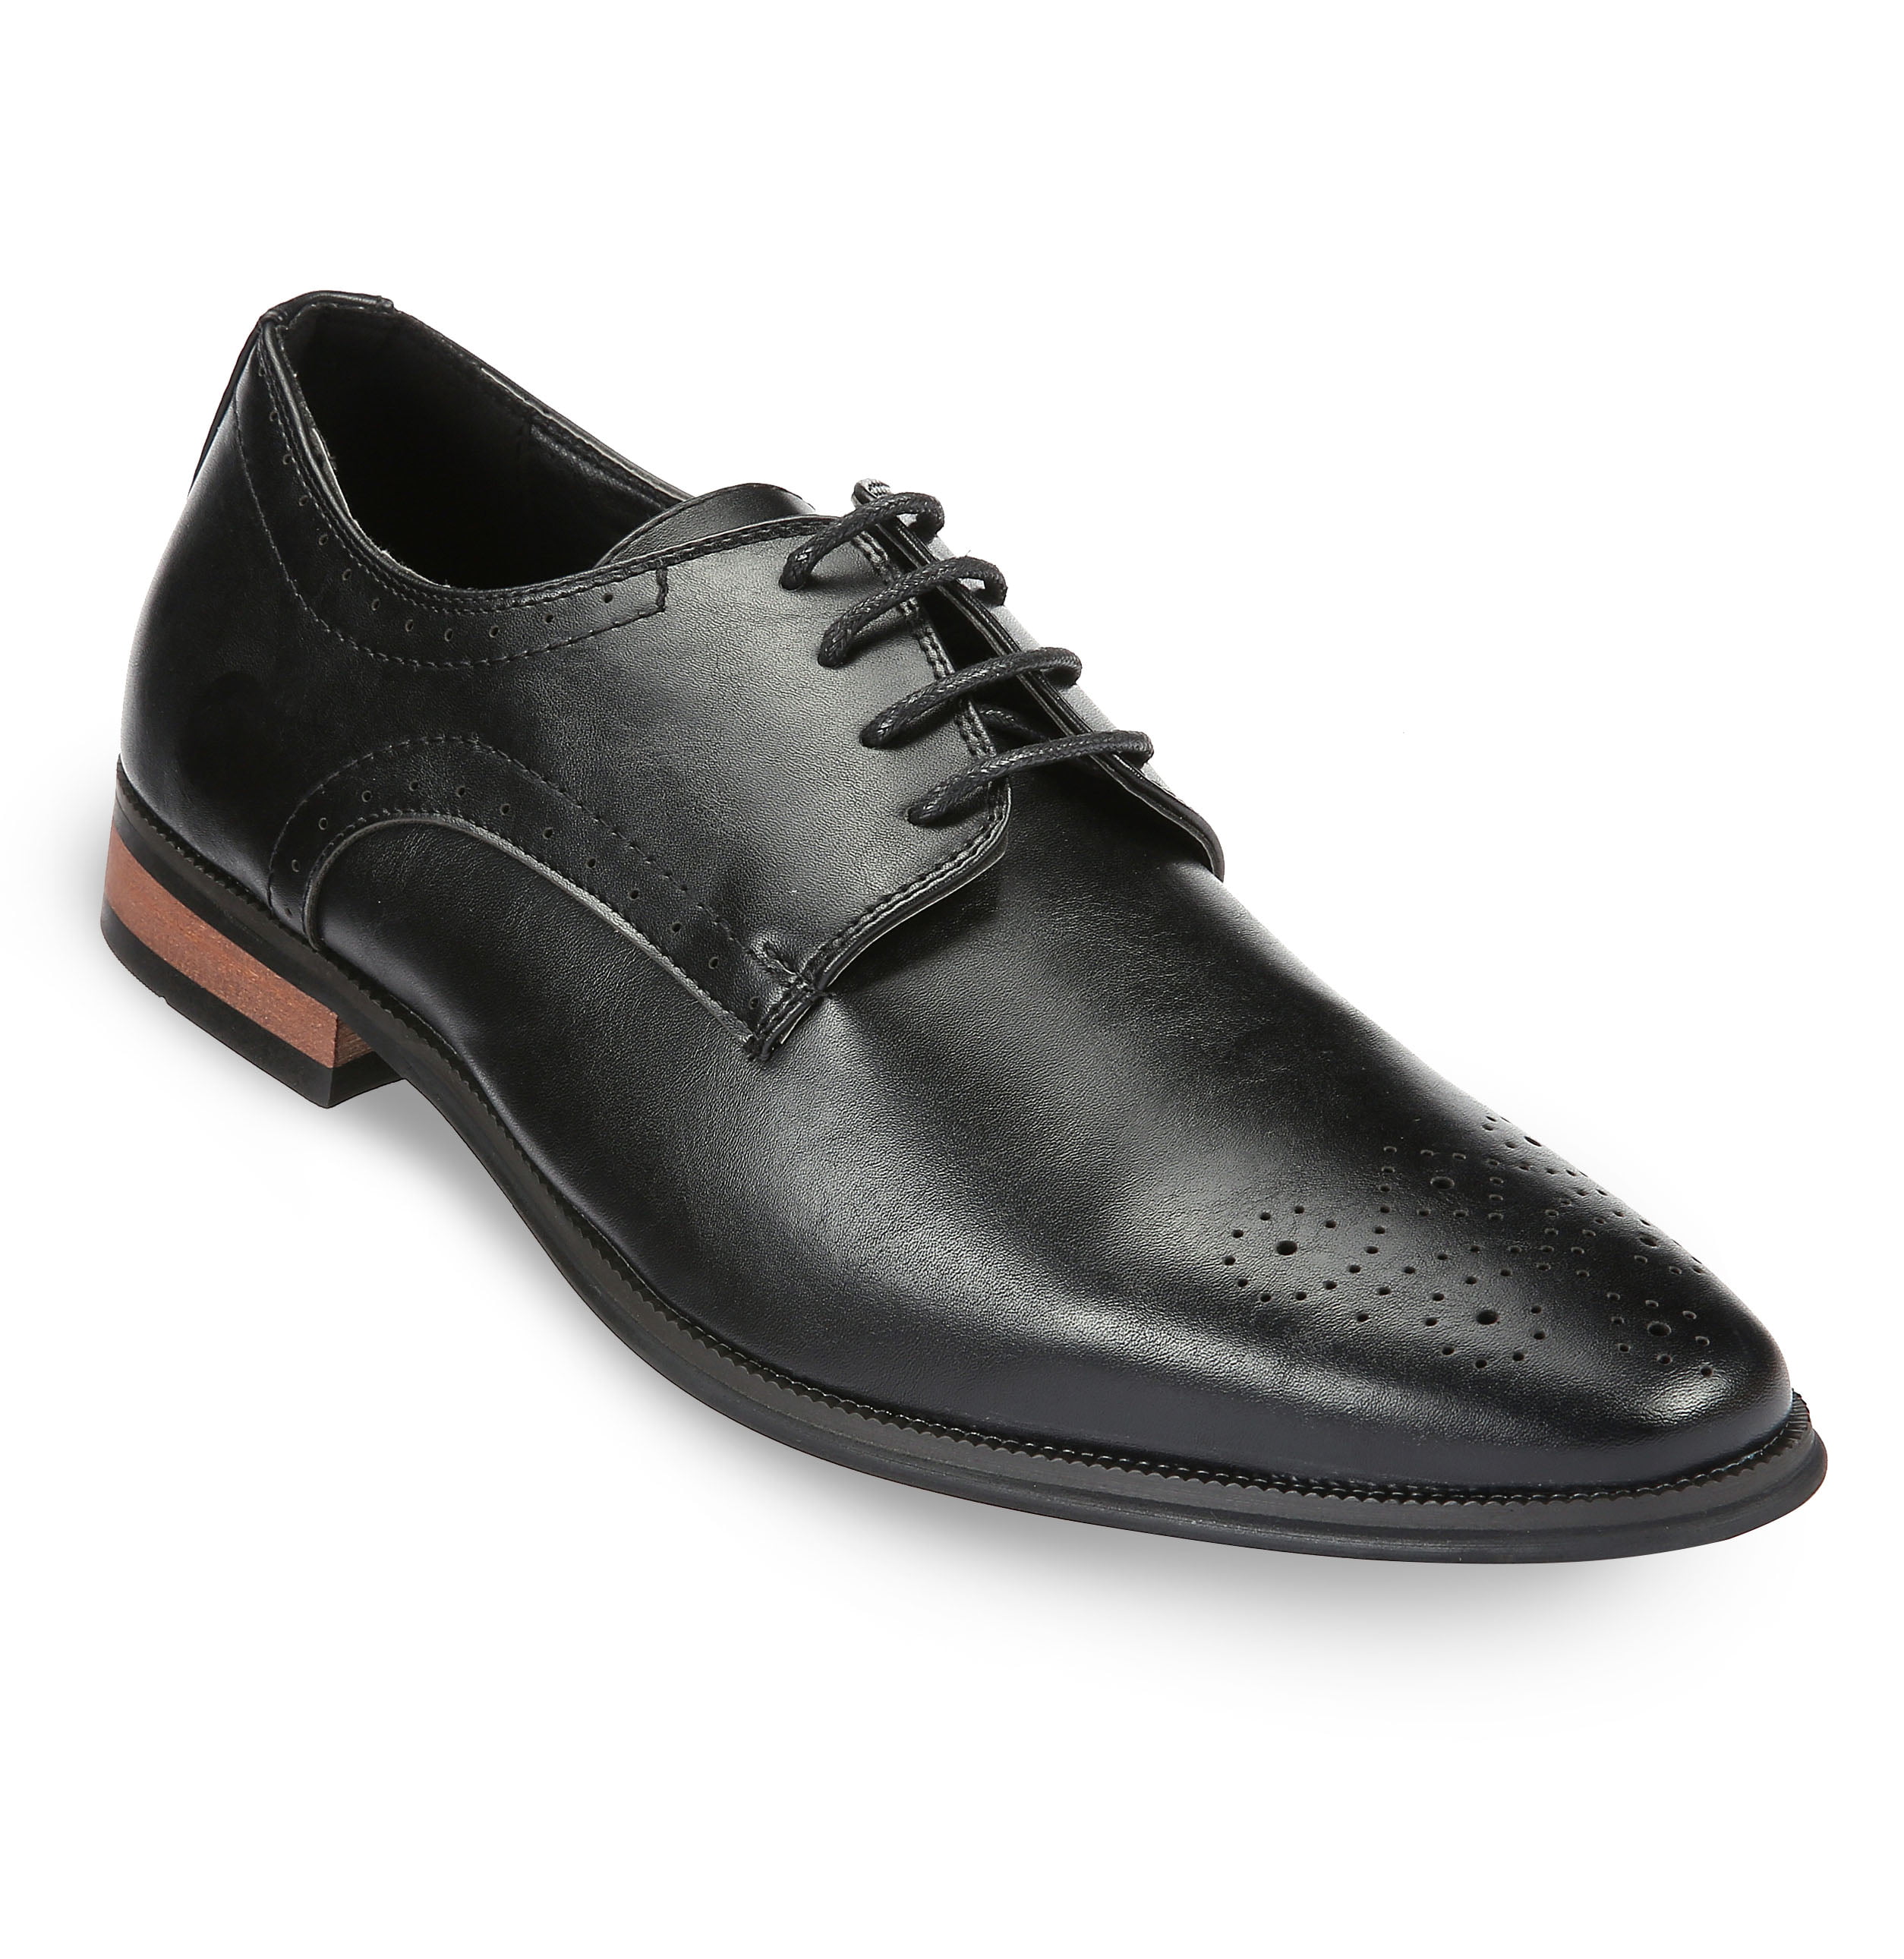 Gallery Seven Punctured Leather Oxford Dress Shoes for Men - Walmart.com